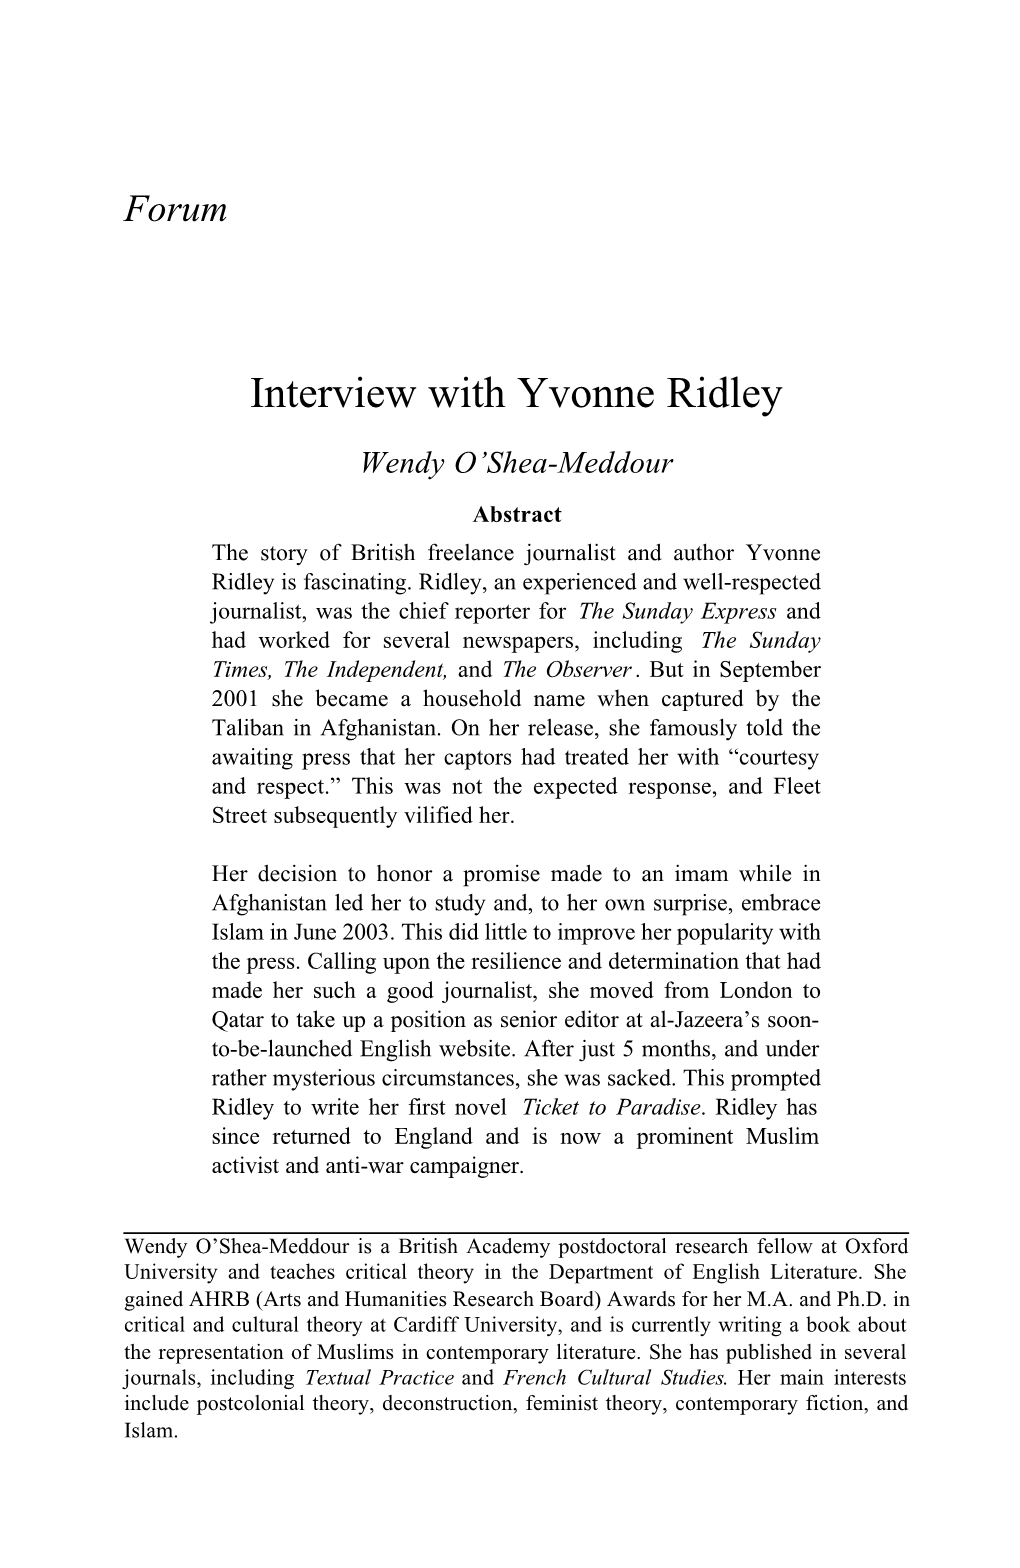 Interview with Yvonne Ridley